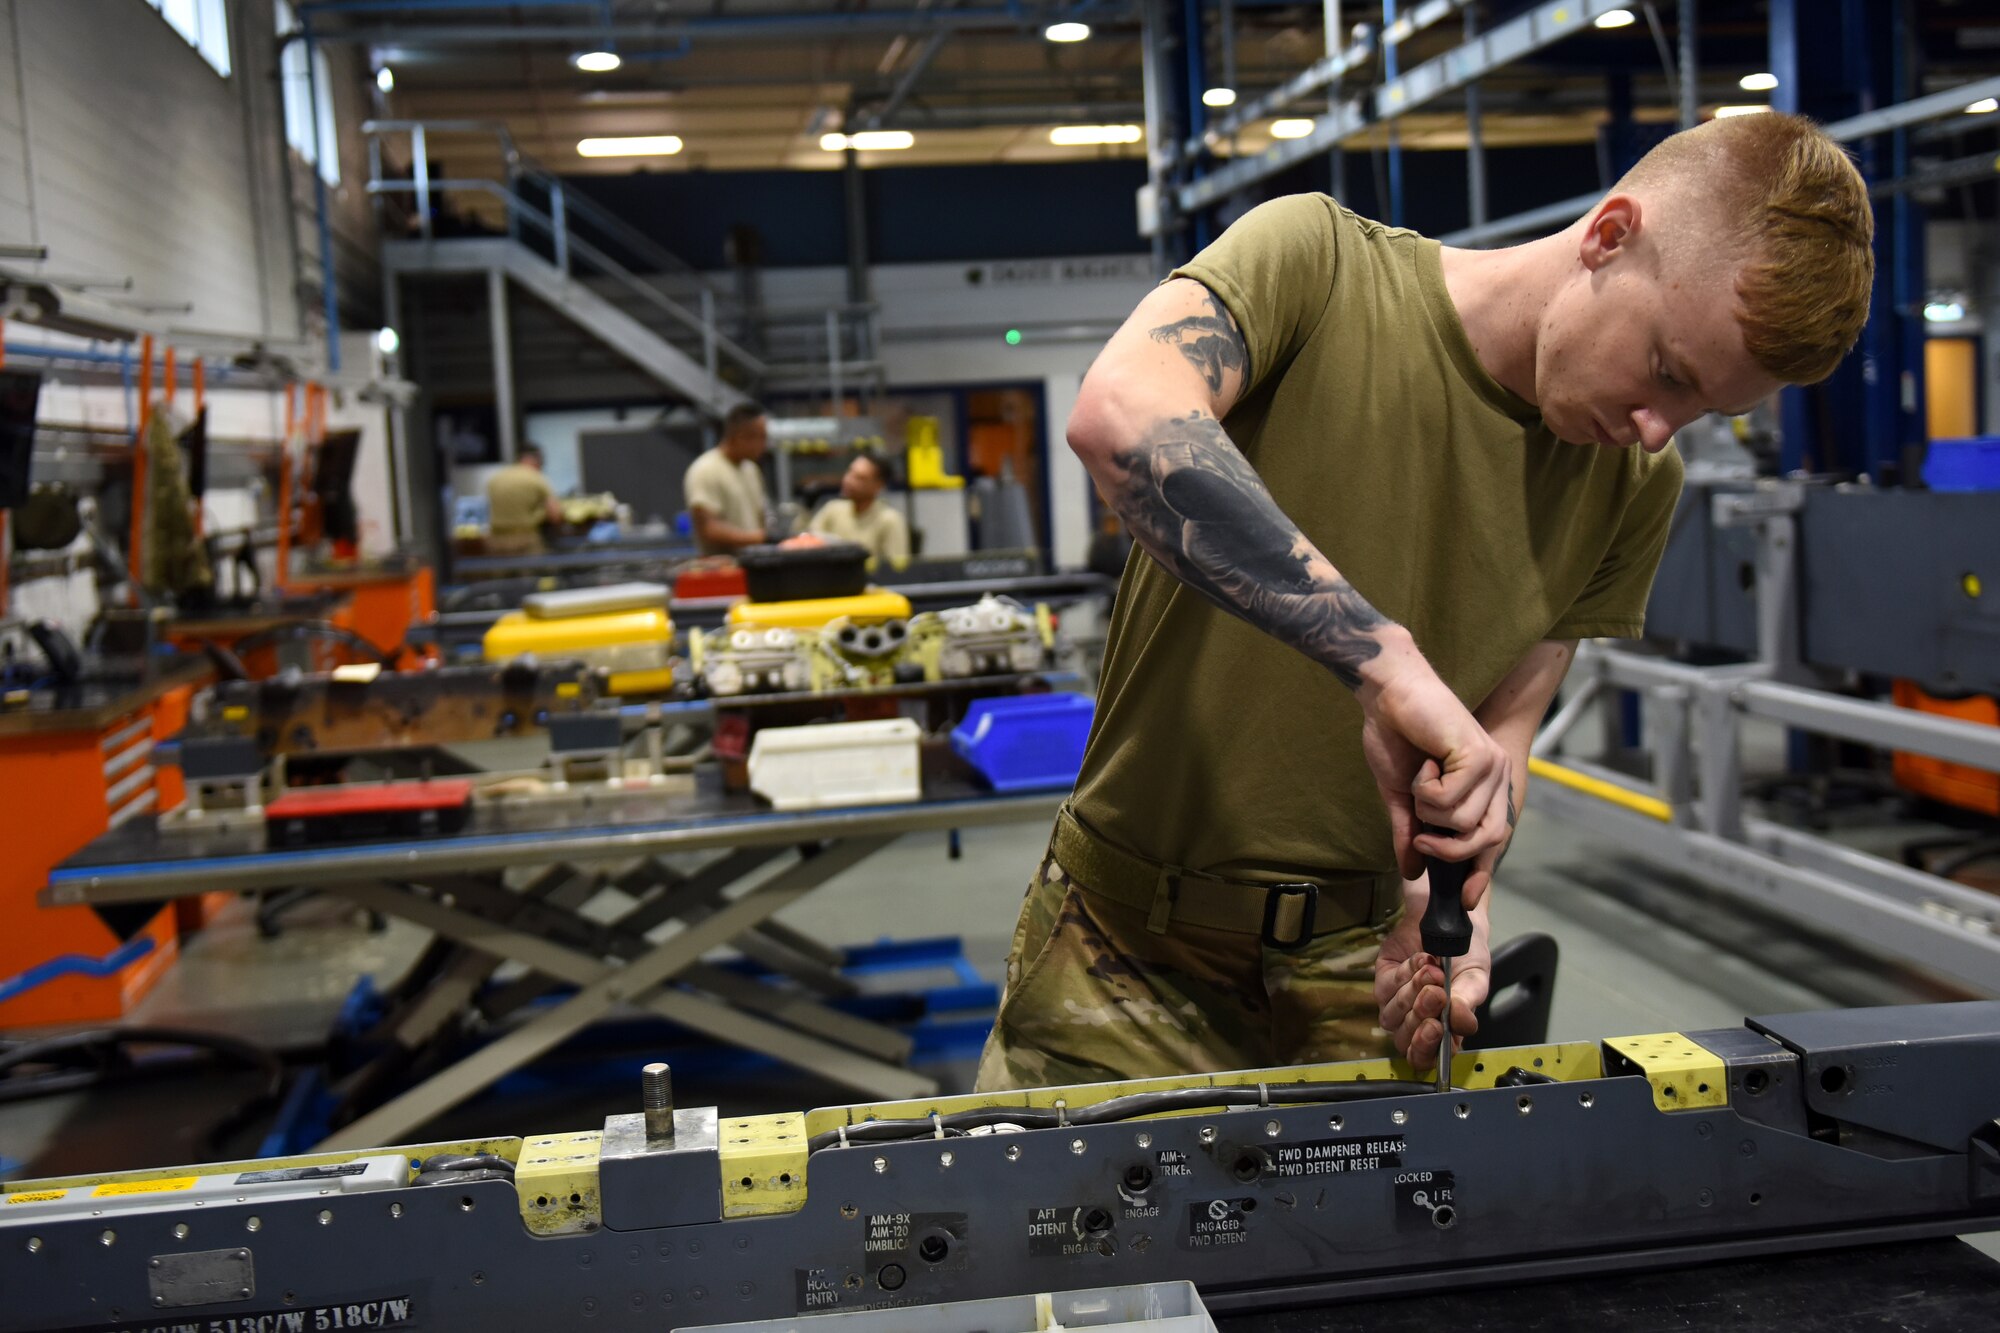 An armament maintenance technician from the 48th Munitions Squadron fixes part of a pylon at Royal Air Force Lakenheath, England, Sept. 11, 2019. The Armament flight works on all weapons-related equipment from both the 48th Fighter Wing F-15C Eagle and F-15E Strike Eagles. (U.S. Air Force photo by Airman 1st Class Madeline Herzog)